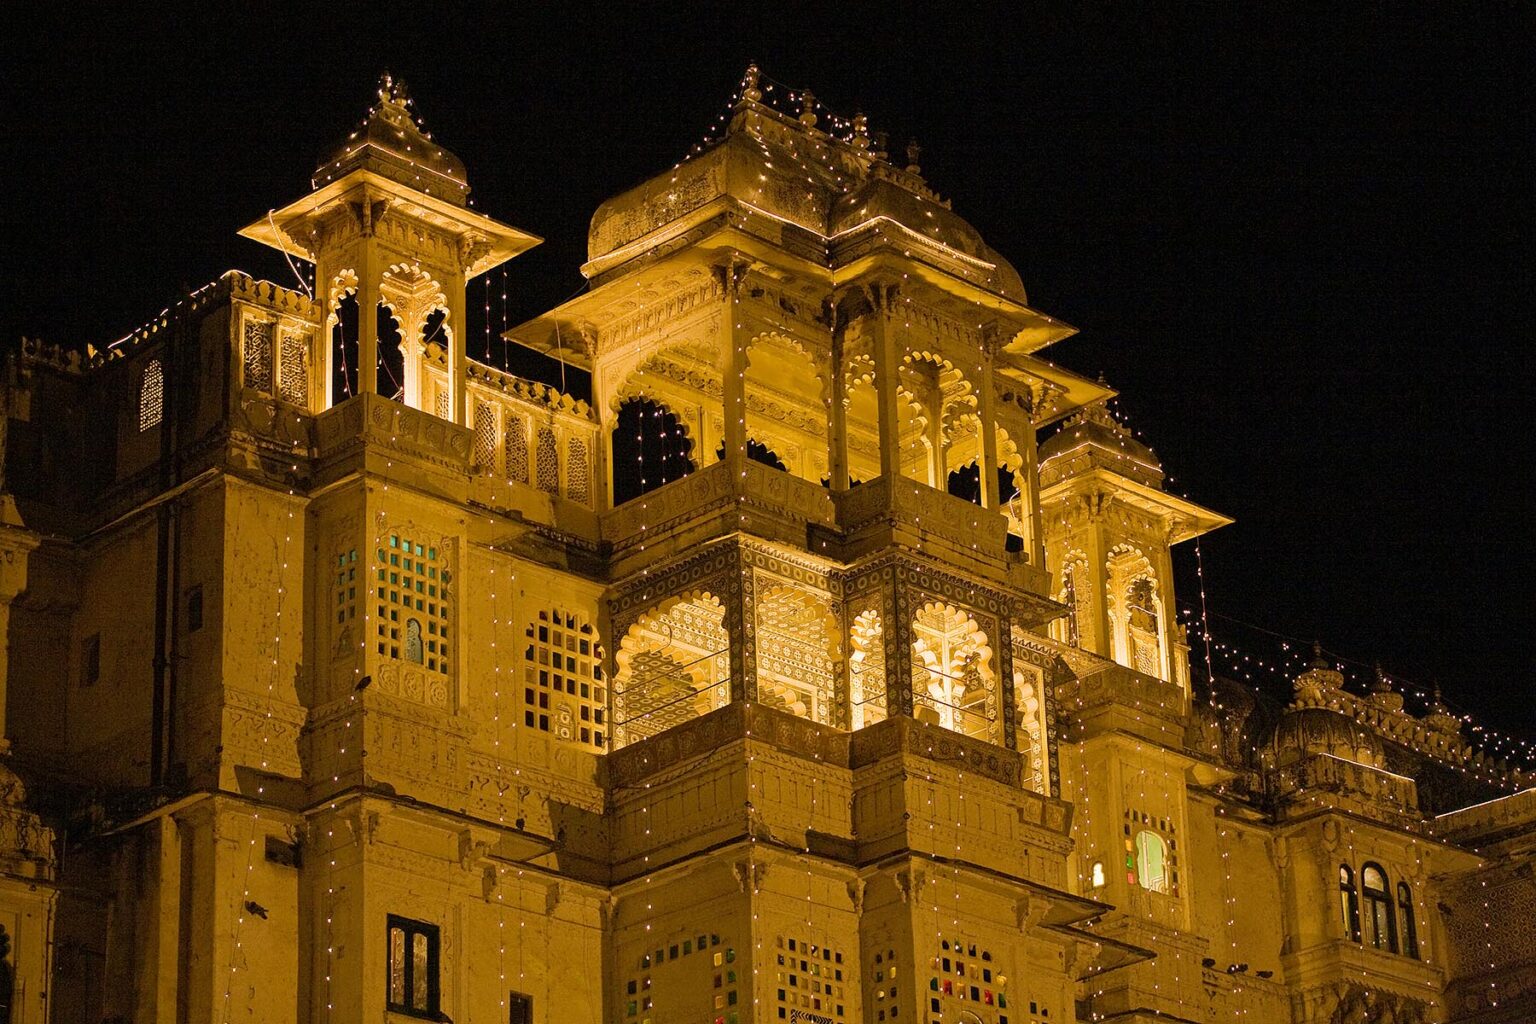 Night view of the CITY PALACE of UDAIPUR which was originally built by Maharaja Udai Singh ll in 1600 AD - RAJASTHAN, INDIA